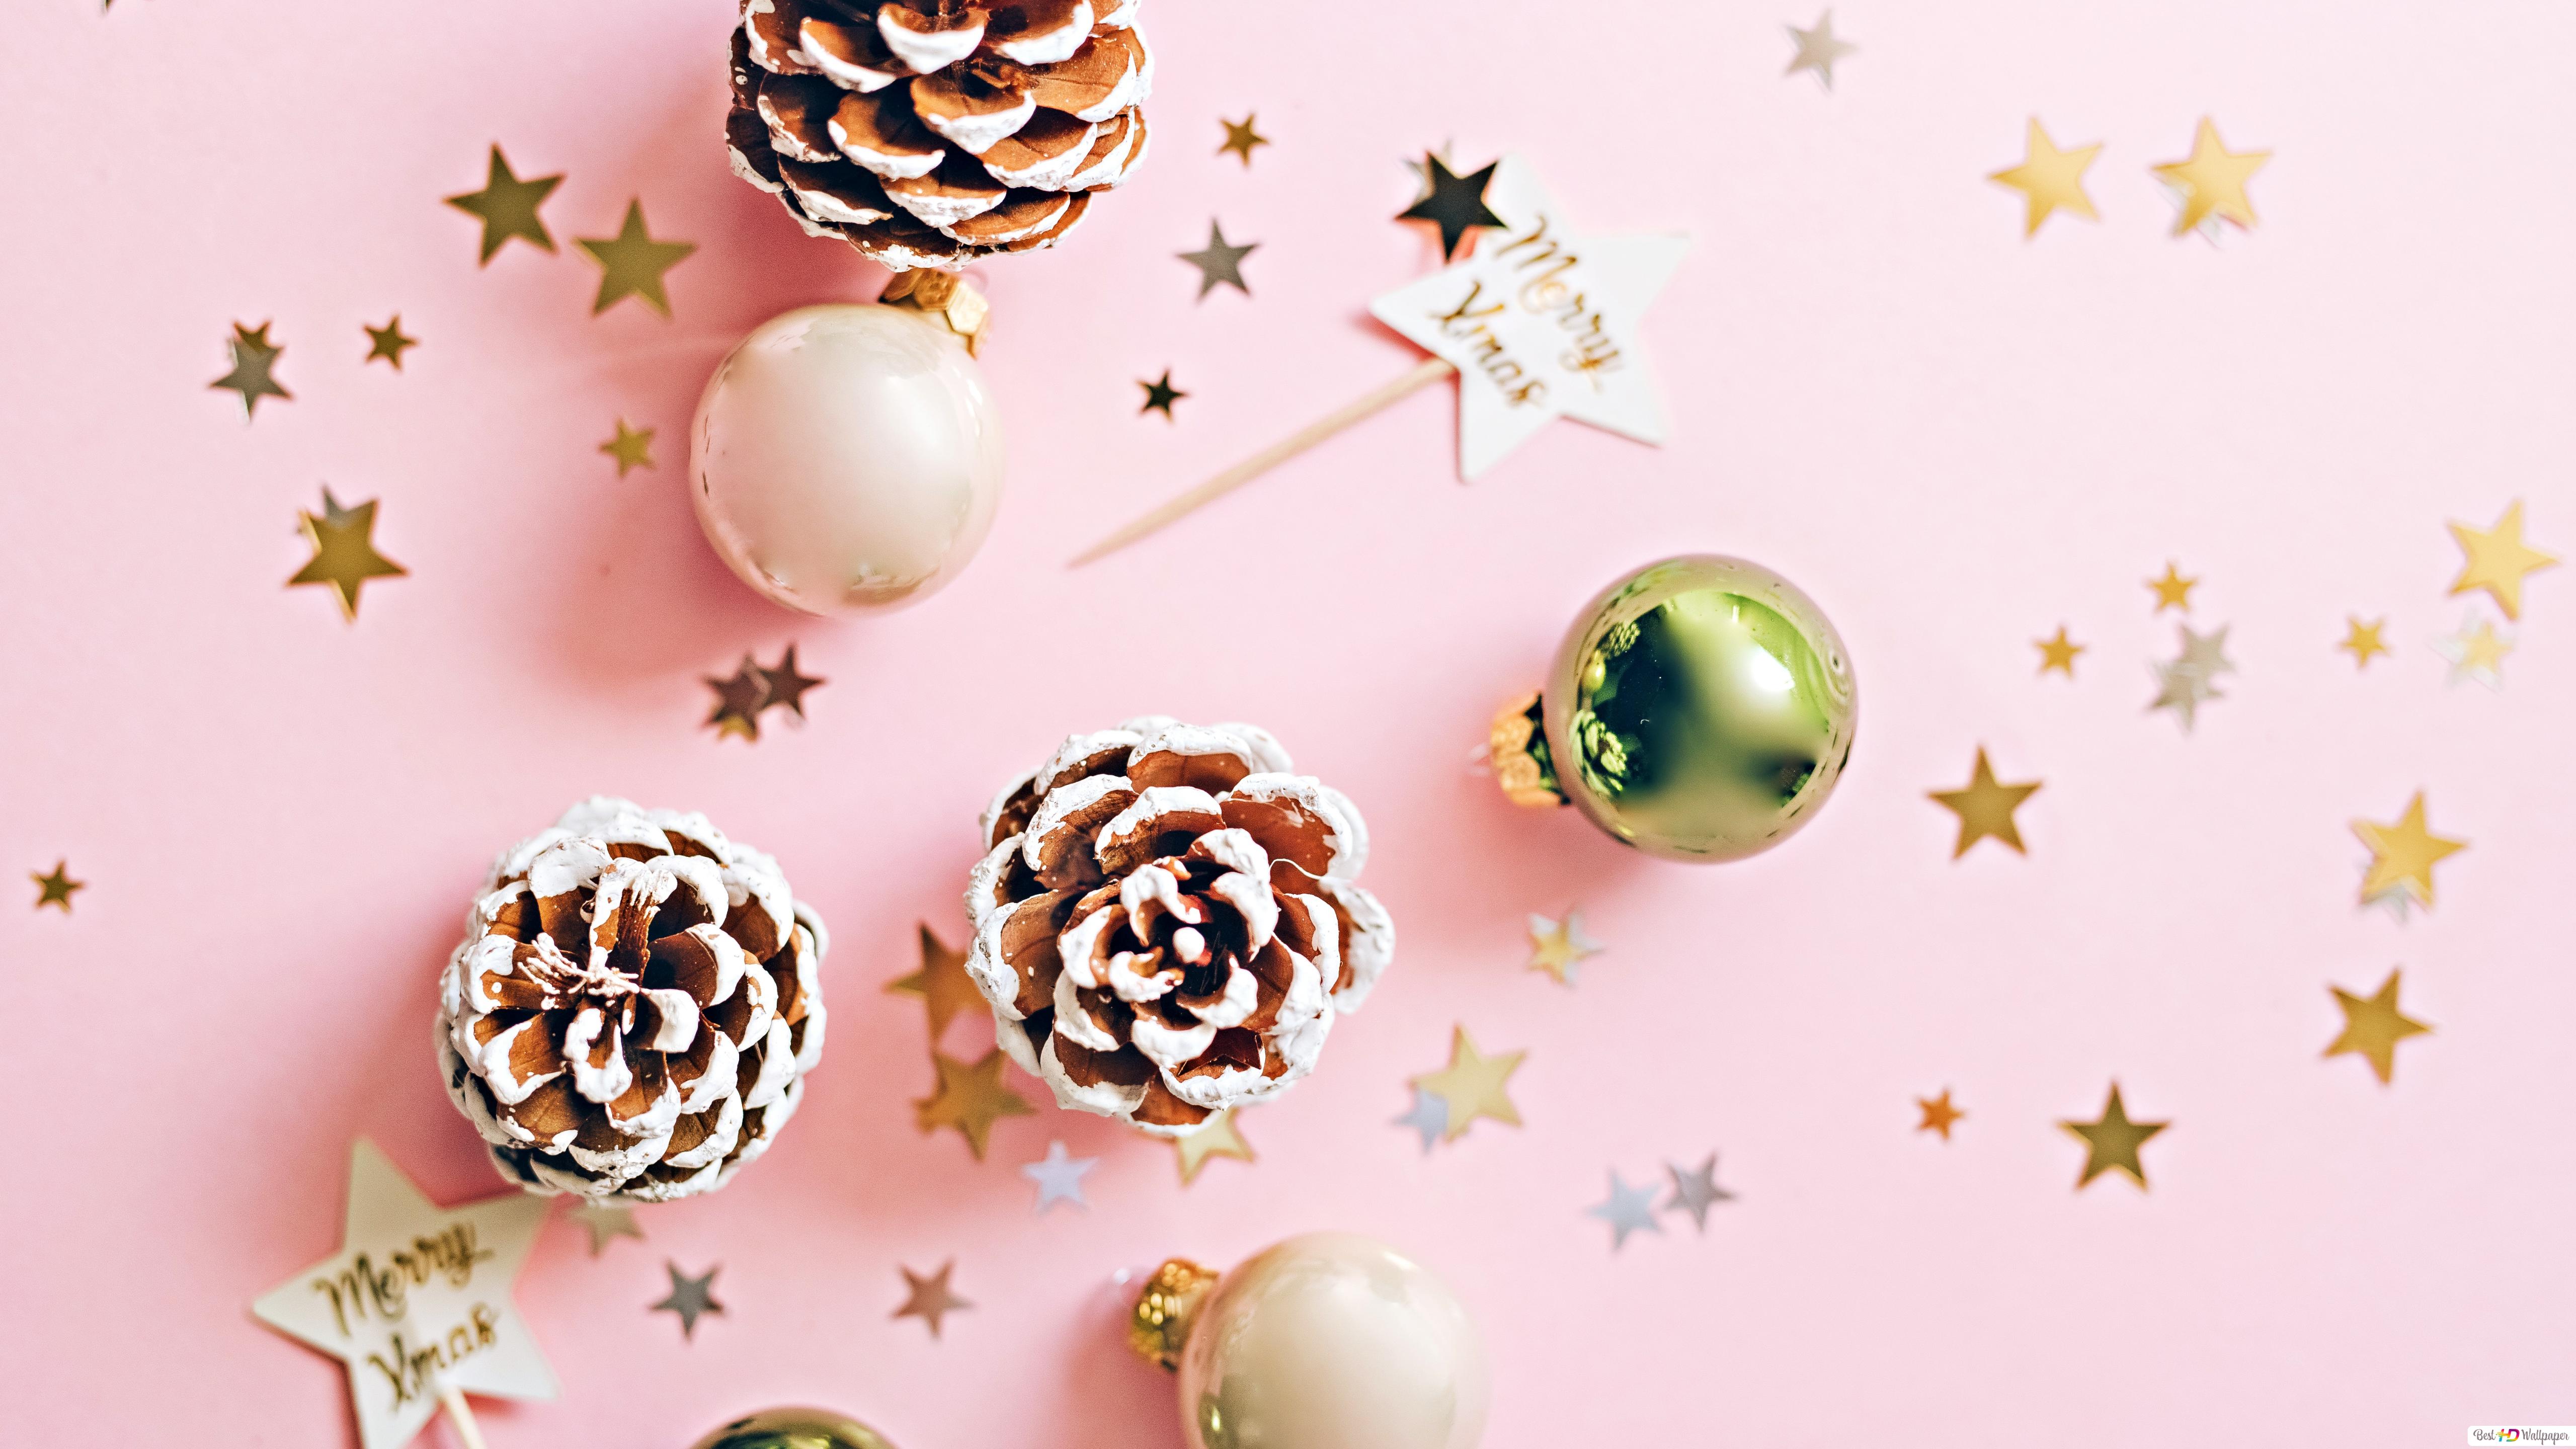 Merry Xmas greetings in pink background with stars, baubles and pinecones HD wallpaper download